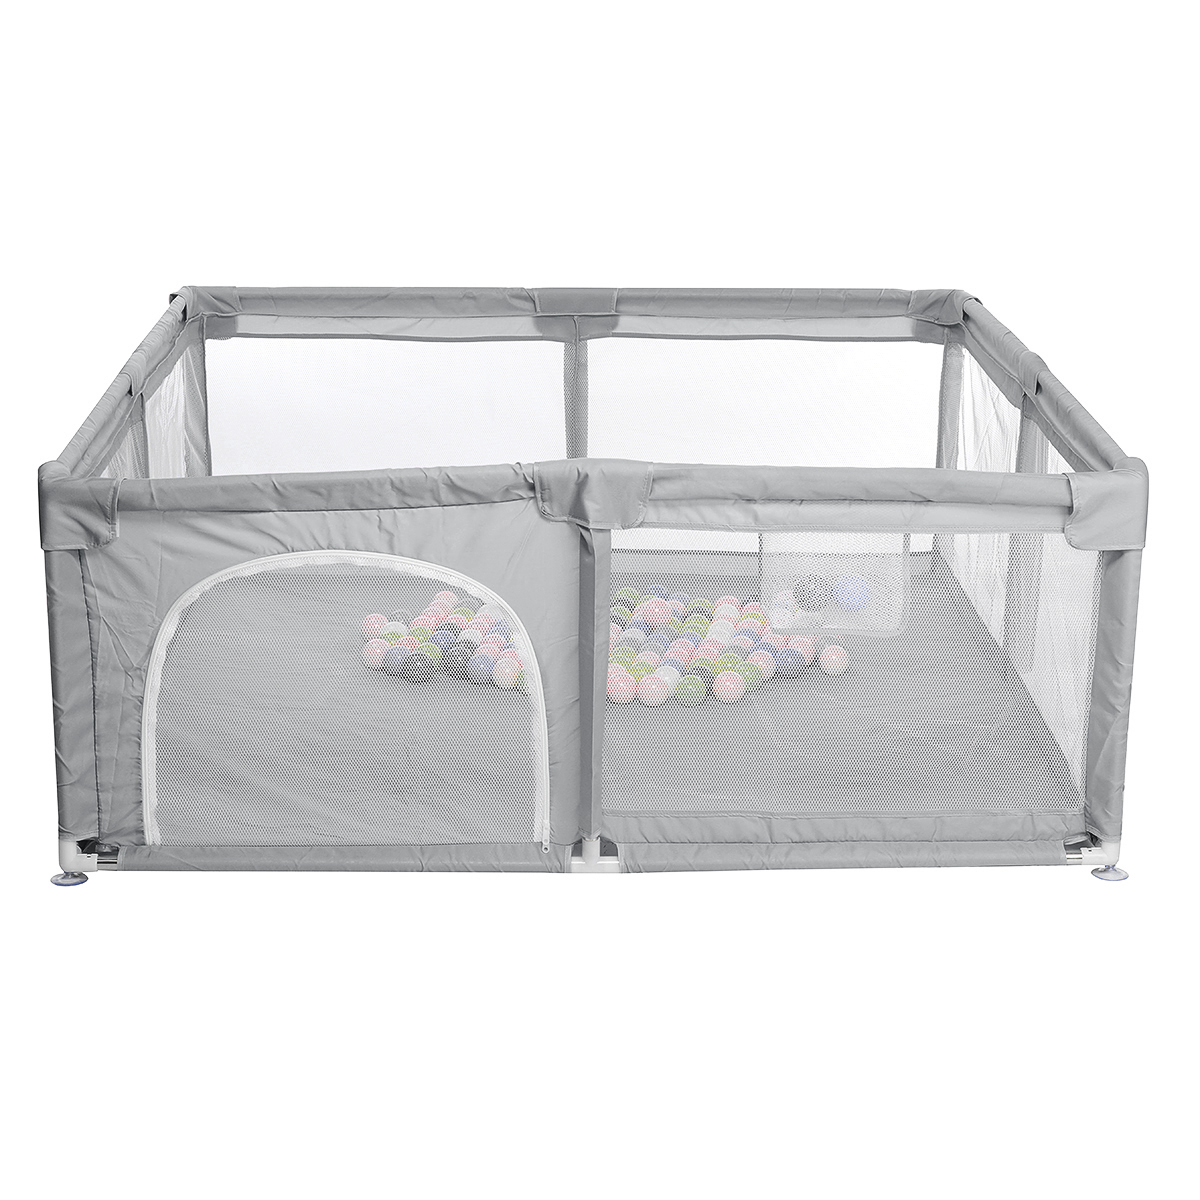 Bioby-15X15M-Childrens-Playground-furniture-Baby-Playpen-Bed-Barriers-Safety-Modular-Folding-Baby-Pa-1936073-7